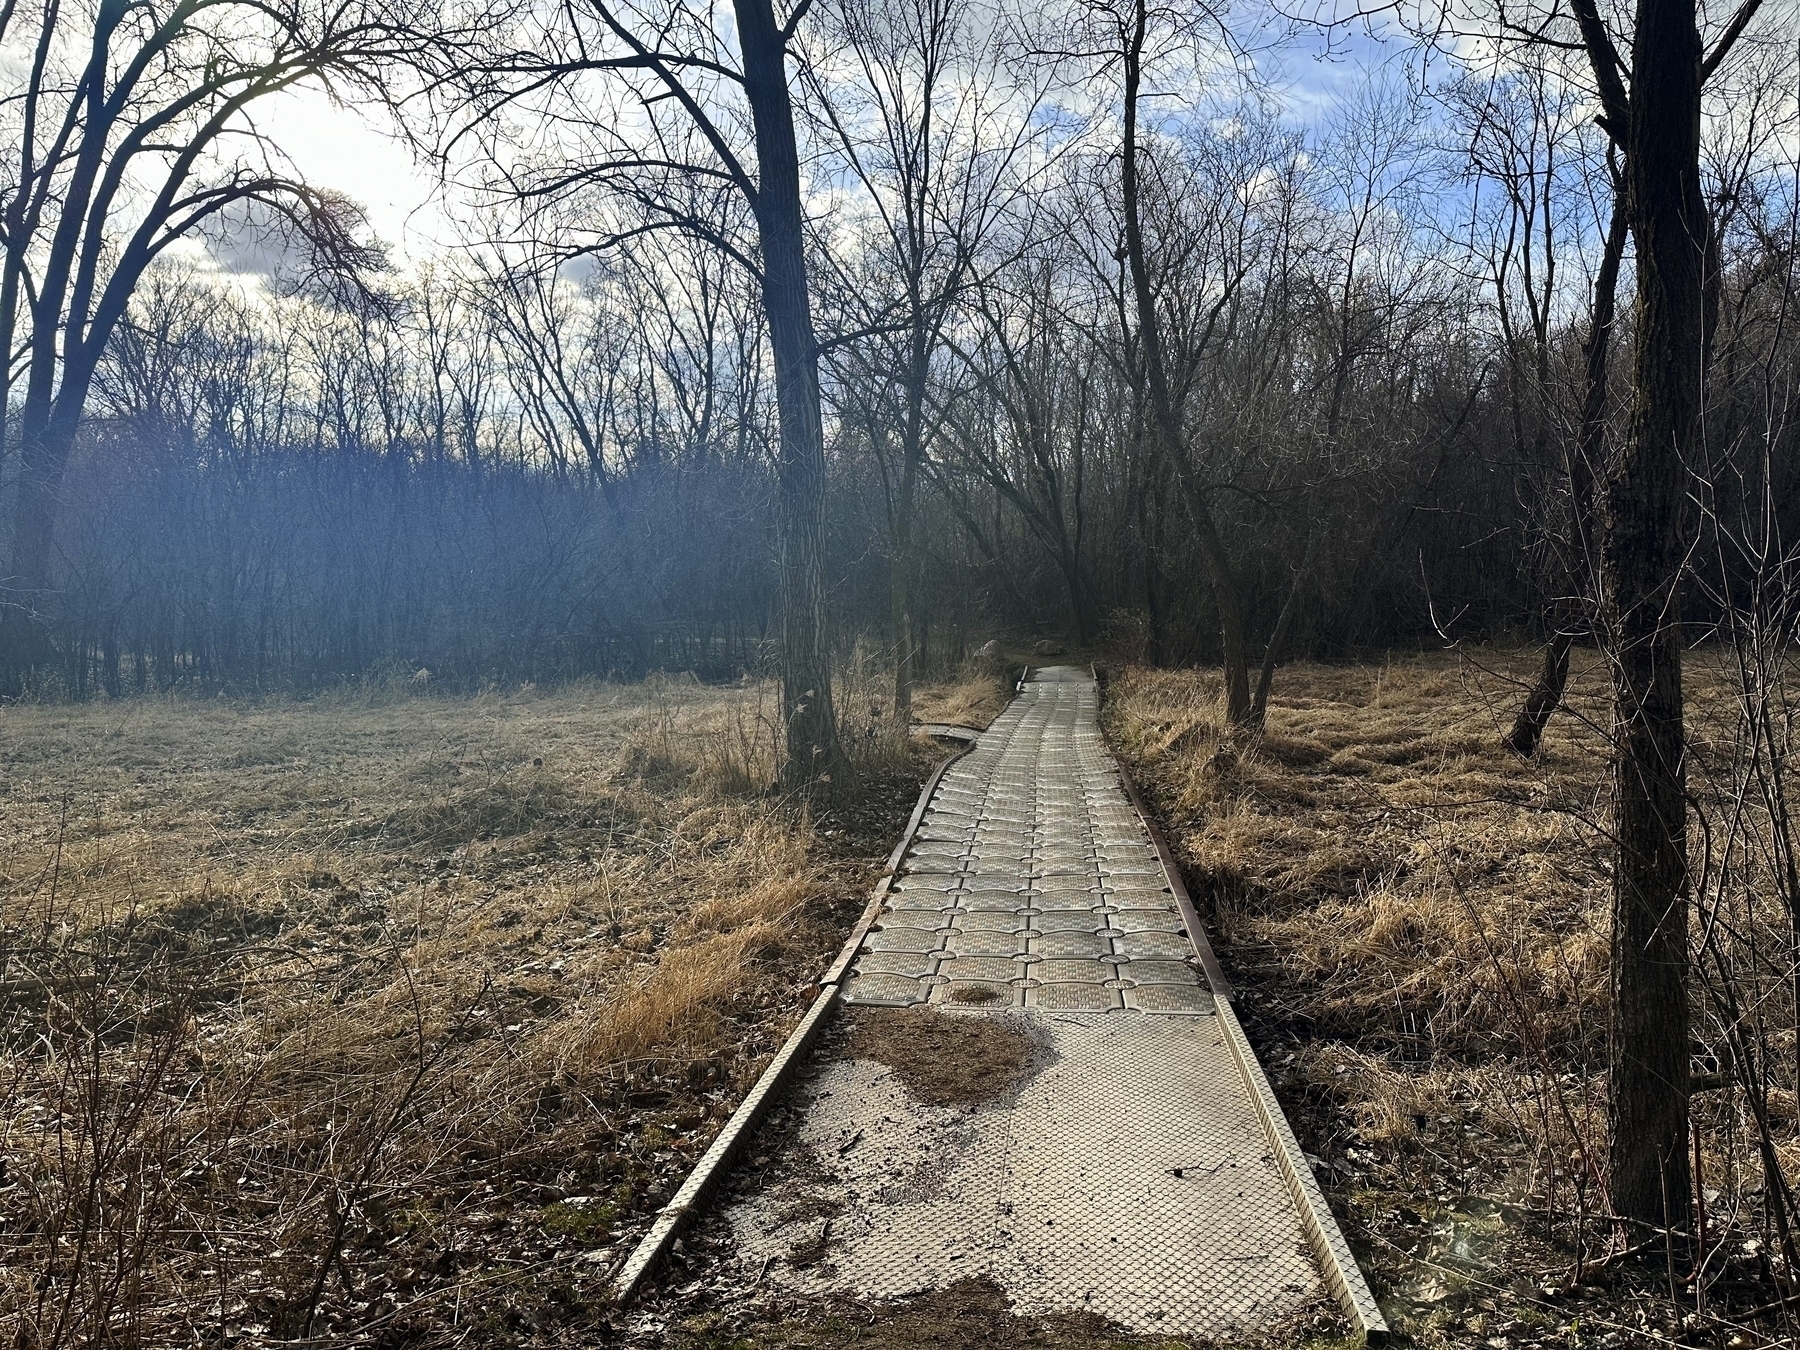 A plastic box boardwalk meanders through dry grassland with leafless trees under a partly cloudy sky.